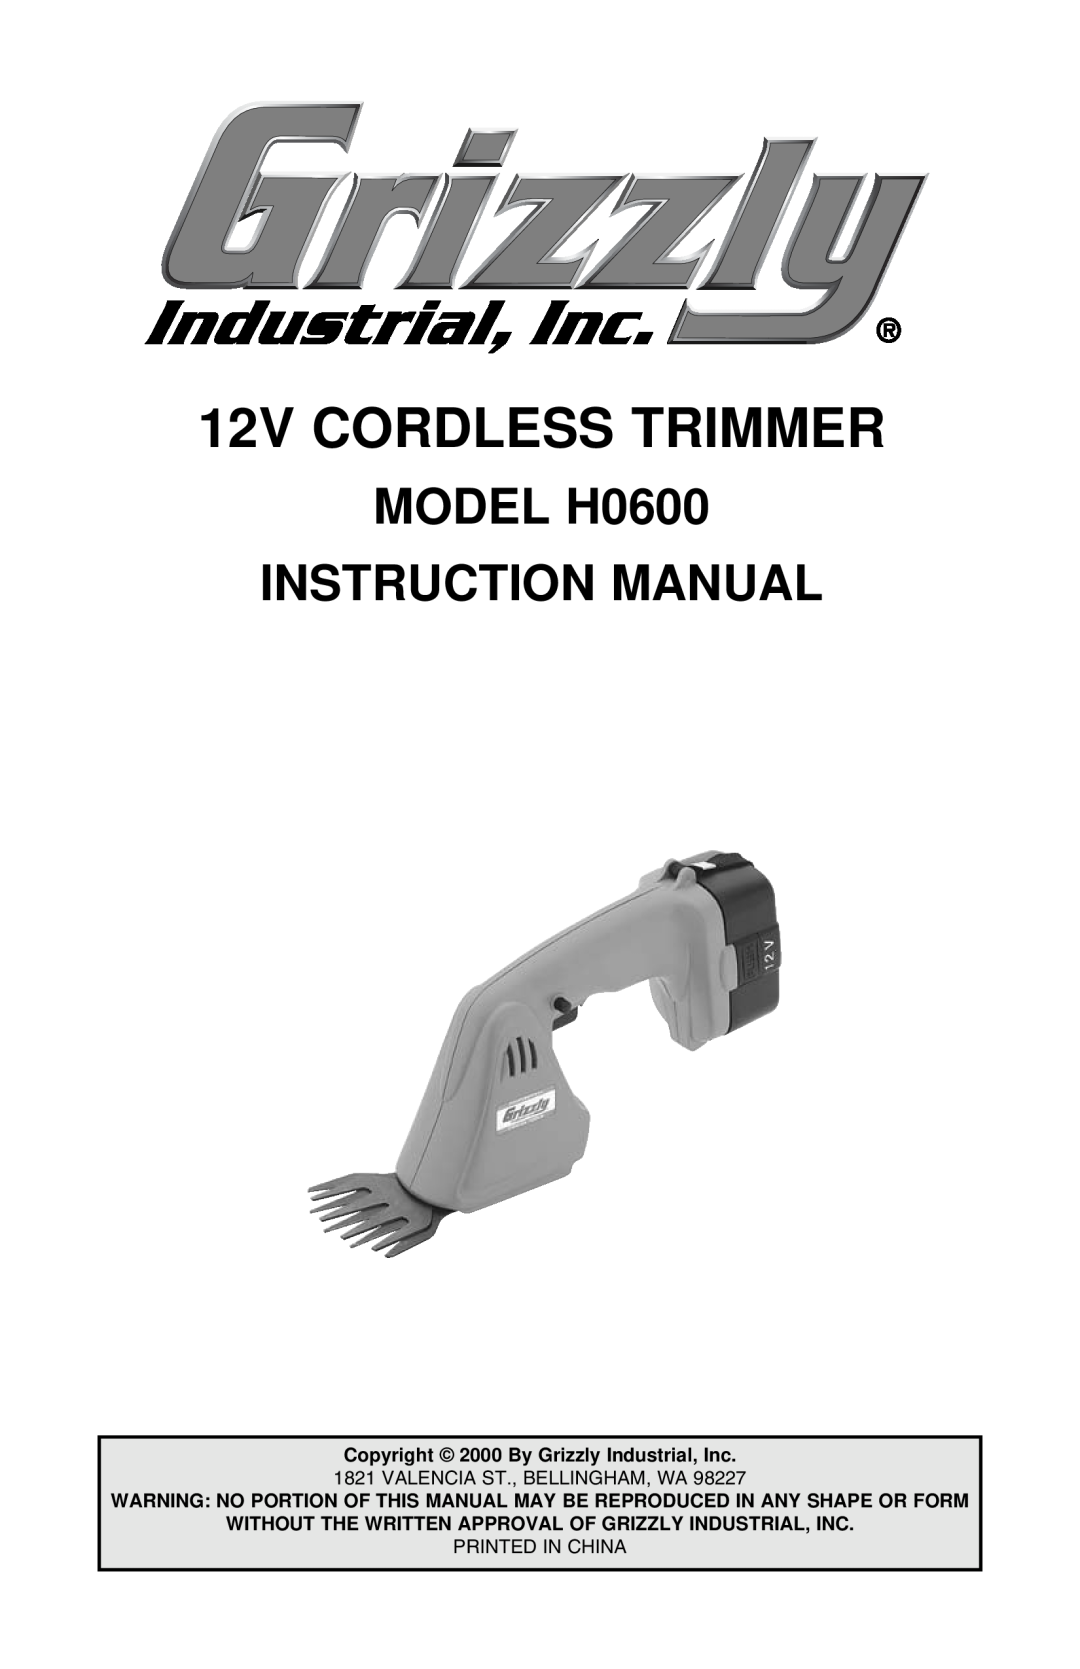 Grizzly H0600 instruction manual 12V CORDLESS TRIMMER 